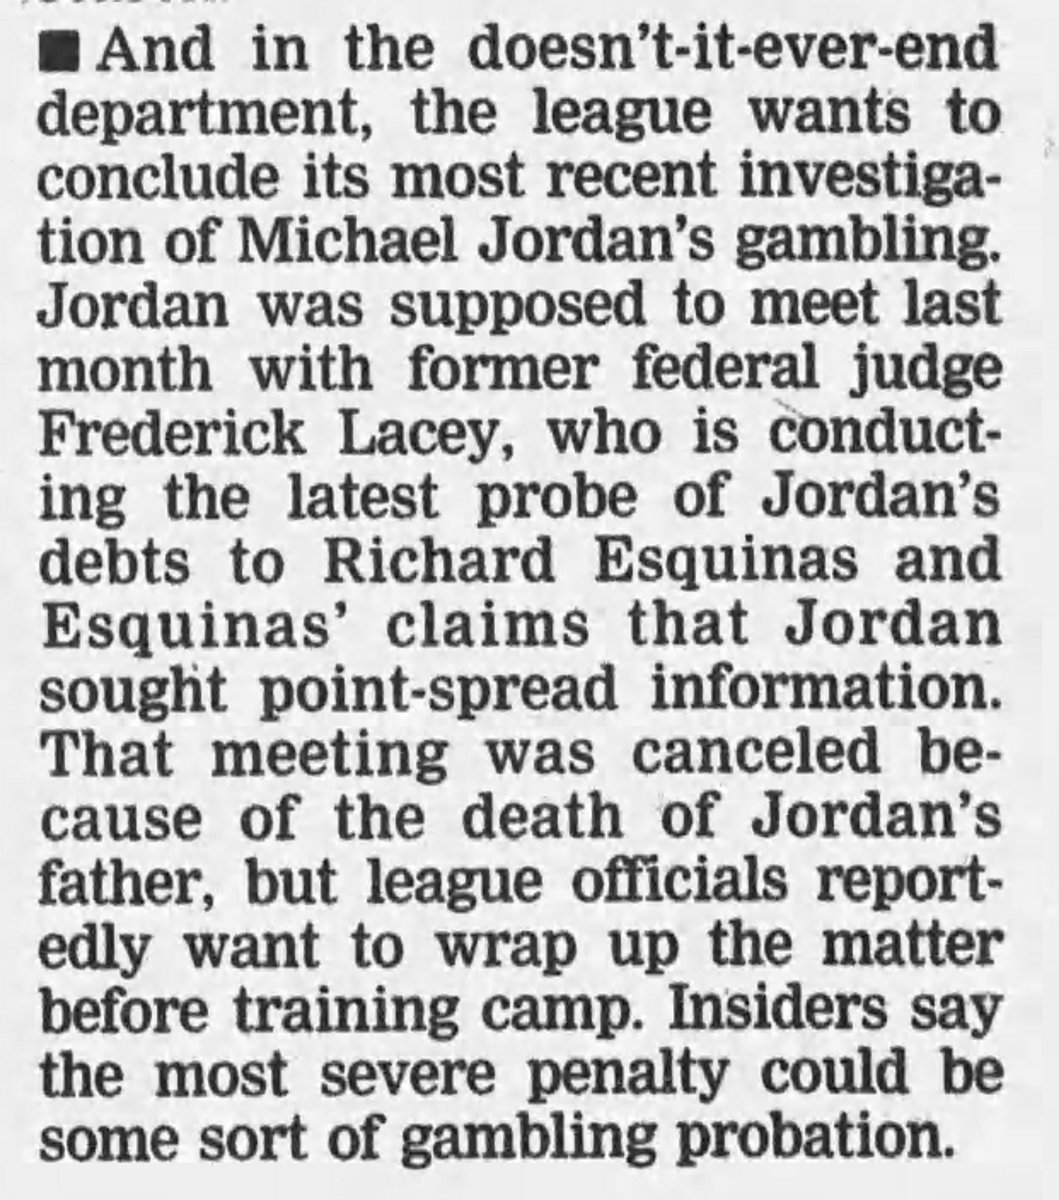 The New York media really hammered Jordan throughout 1993, but local reporters had to take the story seriously. Here is the great Sam Smith reporting in  @ChicagoSports on a possible "gambling probation" from the NBA.This is from Sept. 10, 1993: